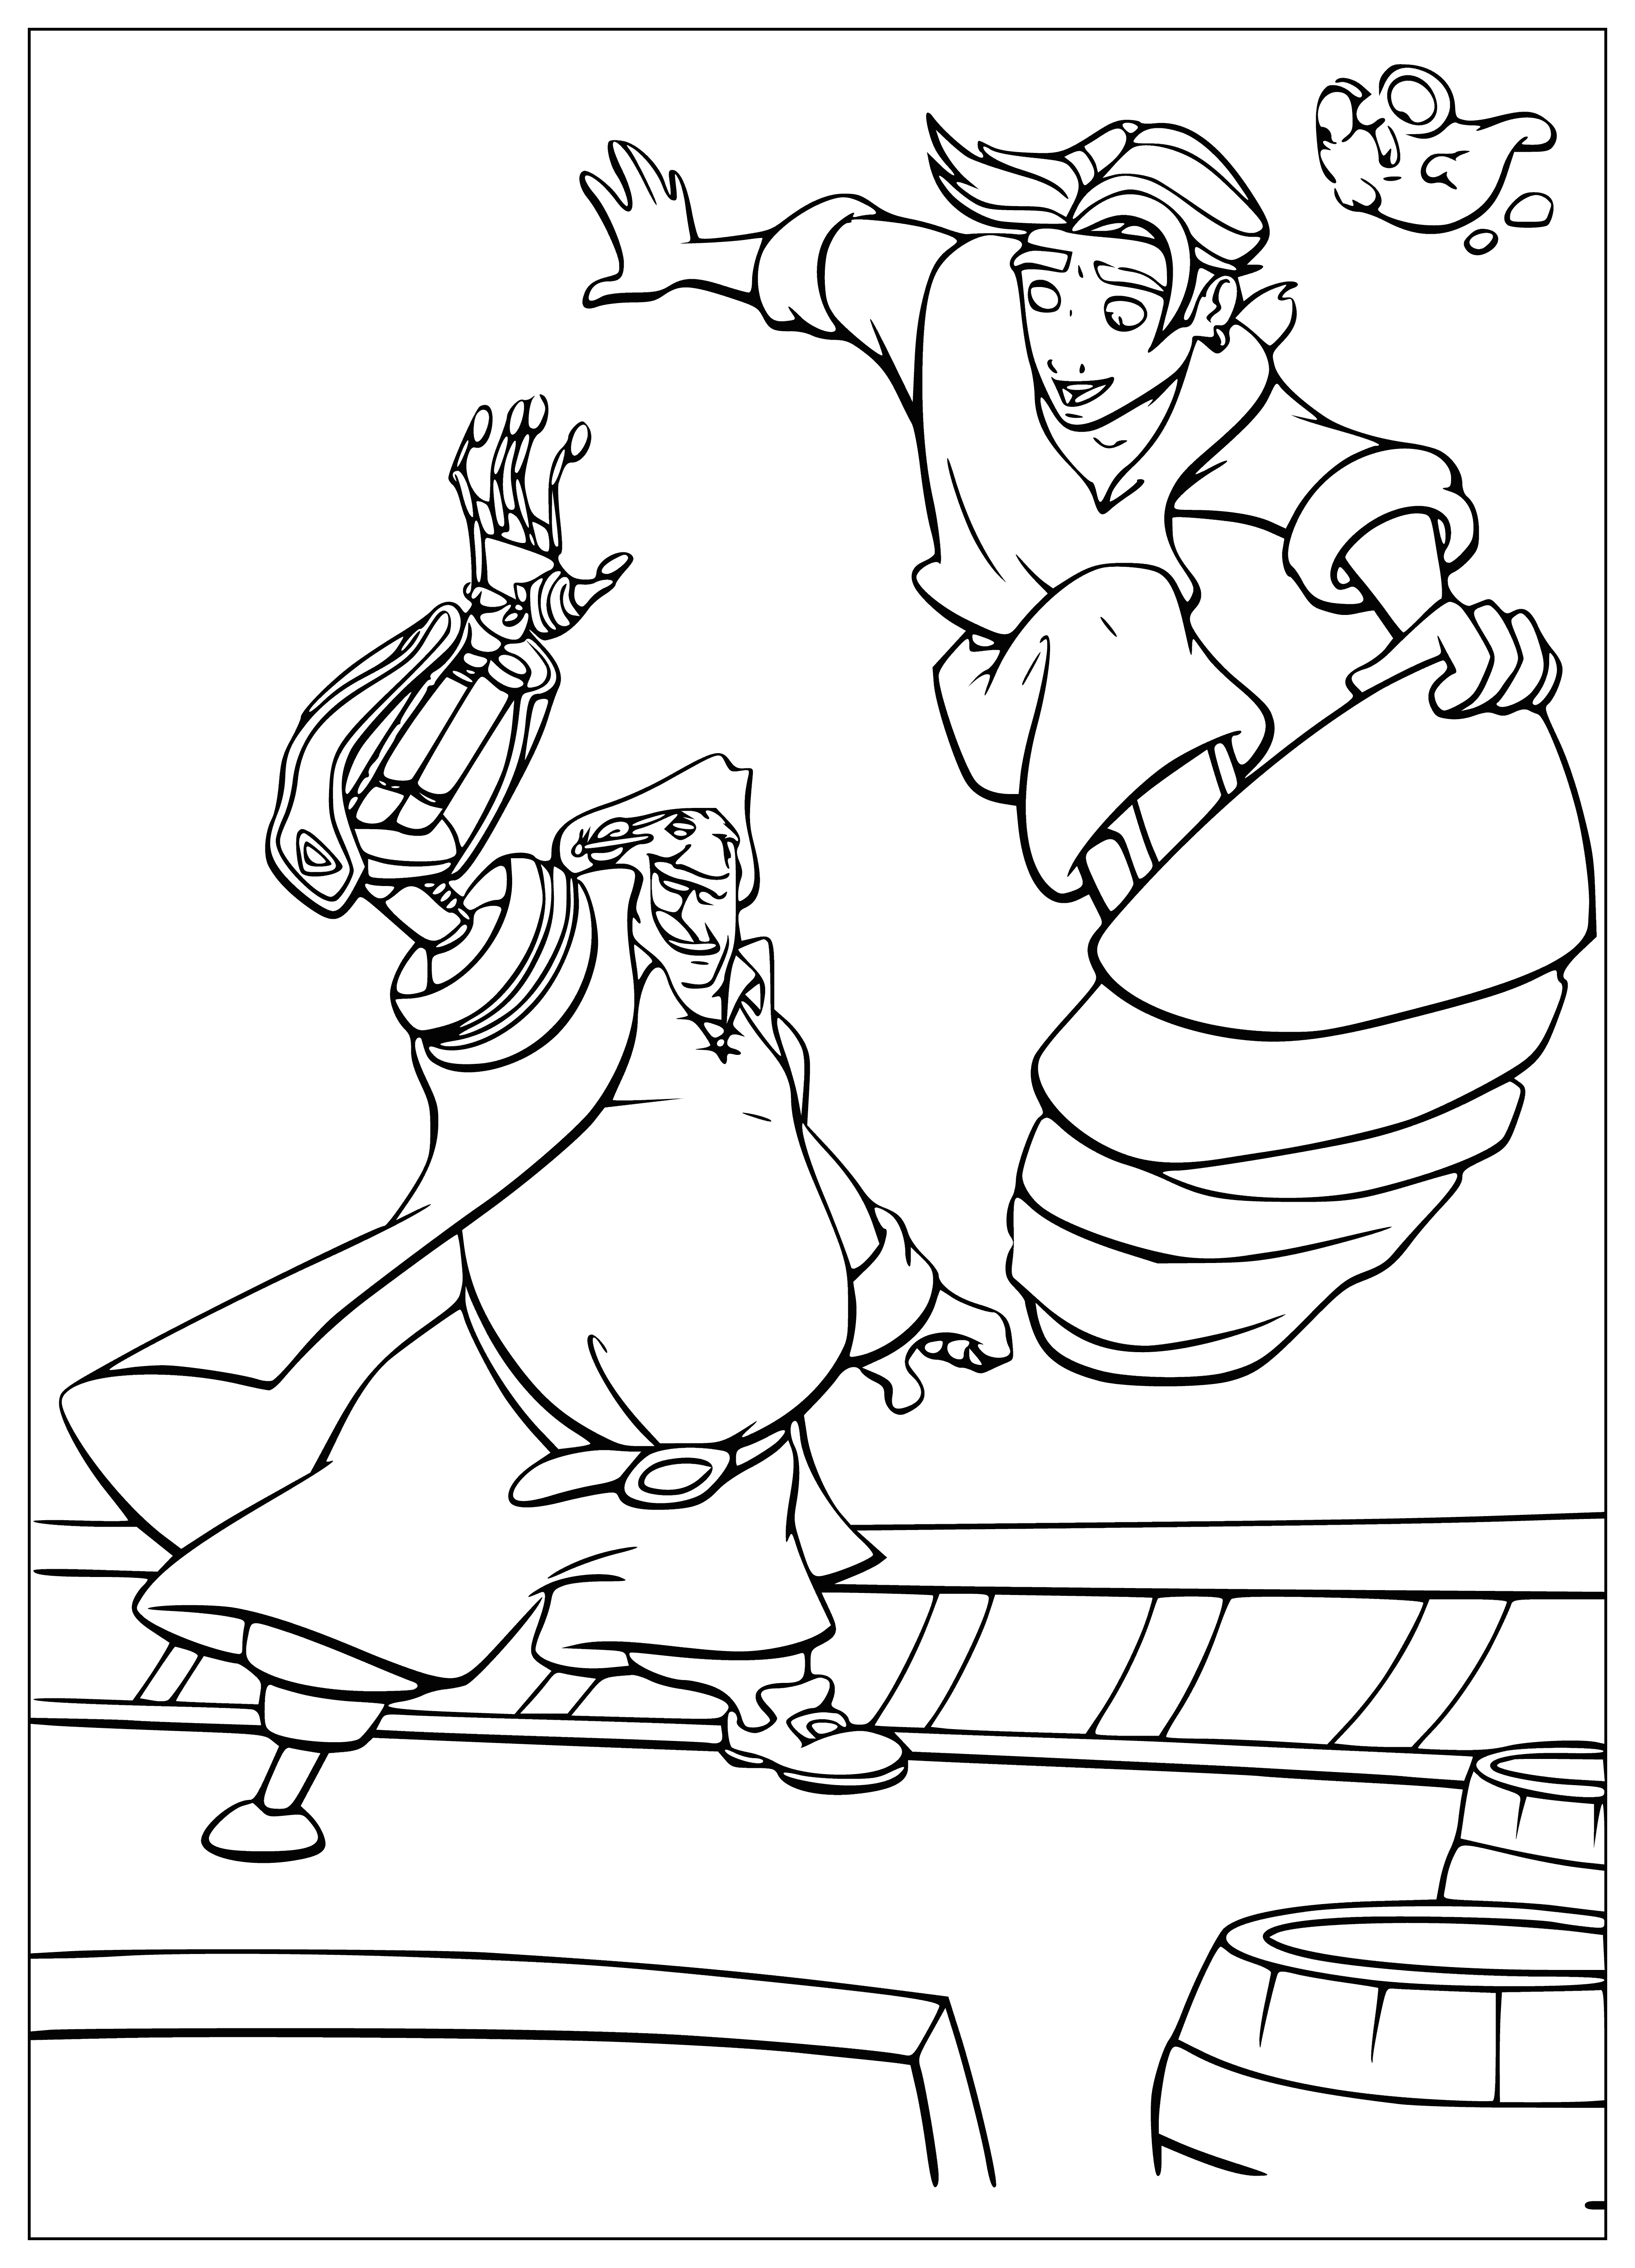 coloring page: Boy riding board in air wearing red, cloth on head, feet gripping board.